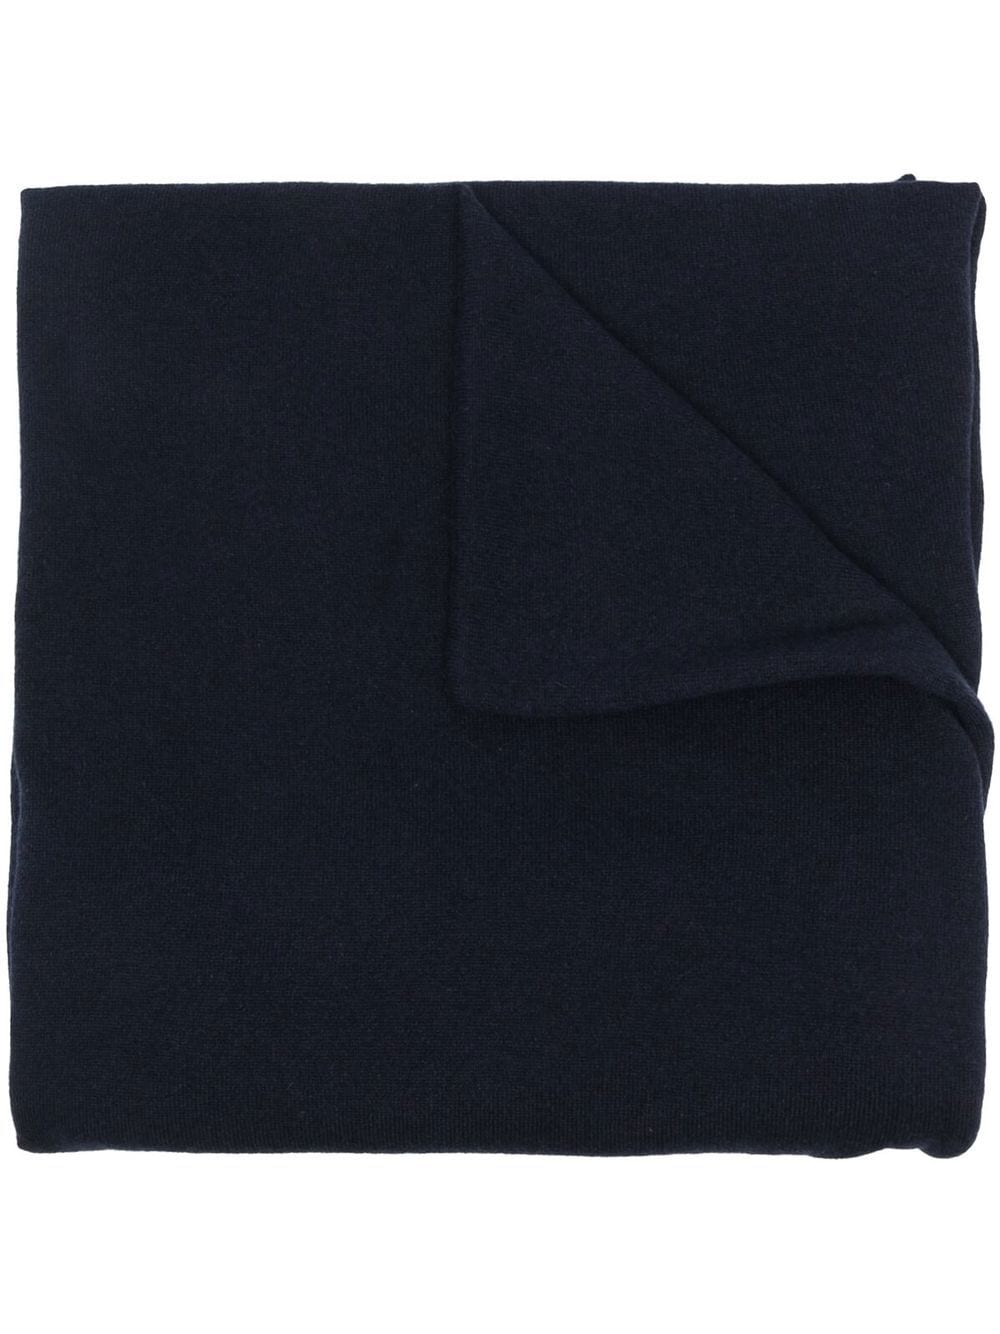 Cashmere Scarf for Women from JIL SANDER FW23 Collection in Navy